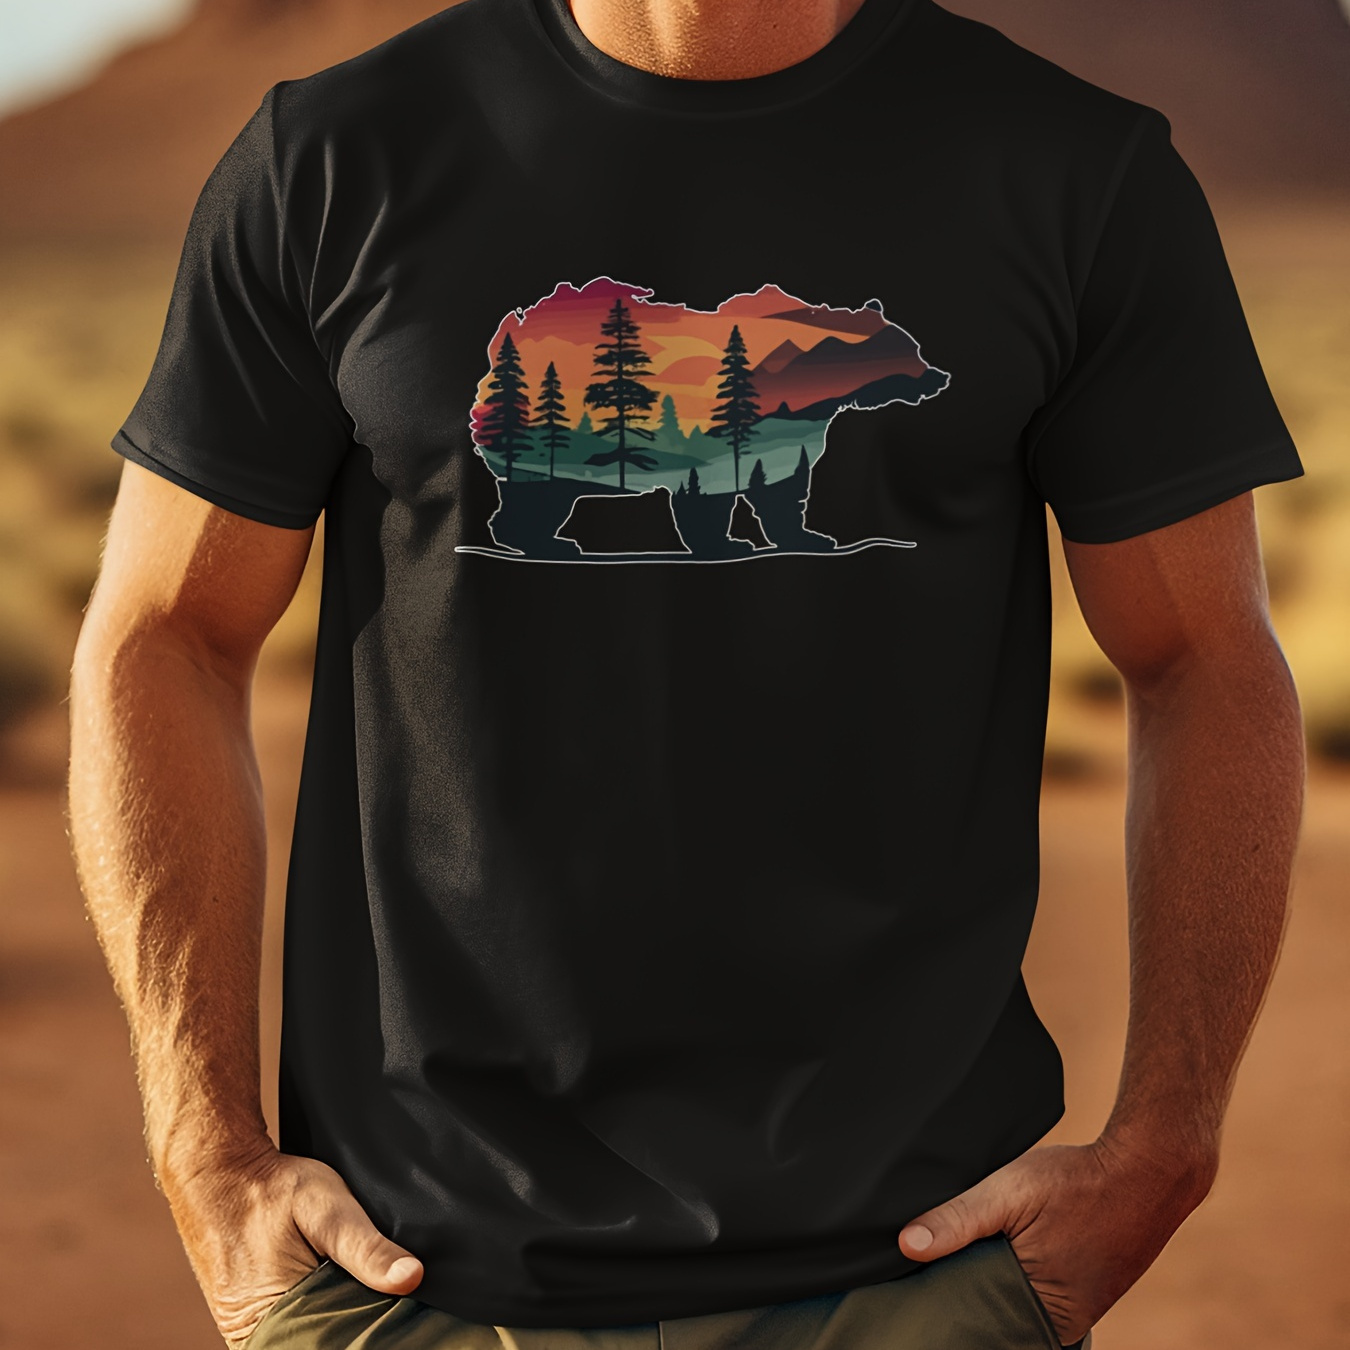 

Easily Distracted By Bears - Men's Front Printed Short-sleeved T-shirt - Comfortable & Breathable Casual Tops For Summer, Spring & Fall - Bear Lover Shirt, Forest Lover Gift